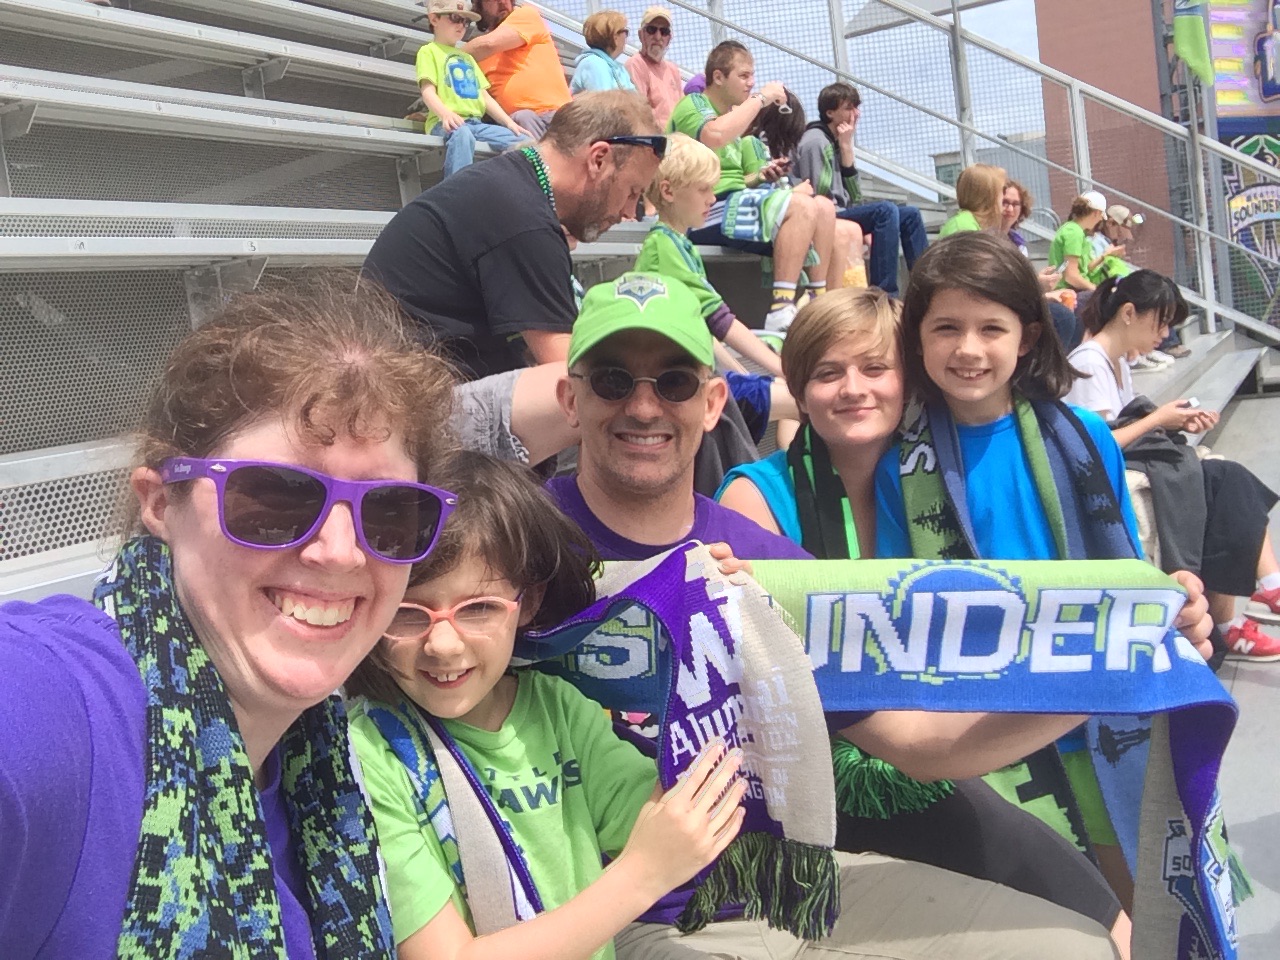 Libby with her family on UW day at the Sounders.